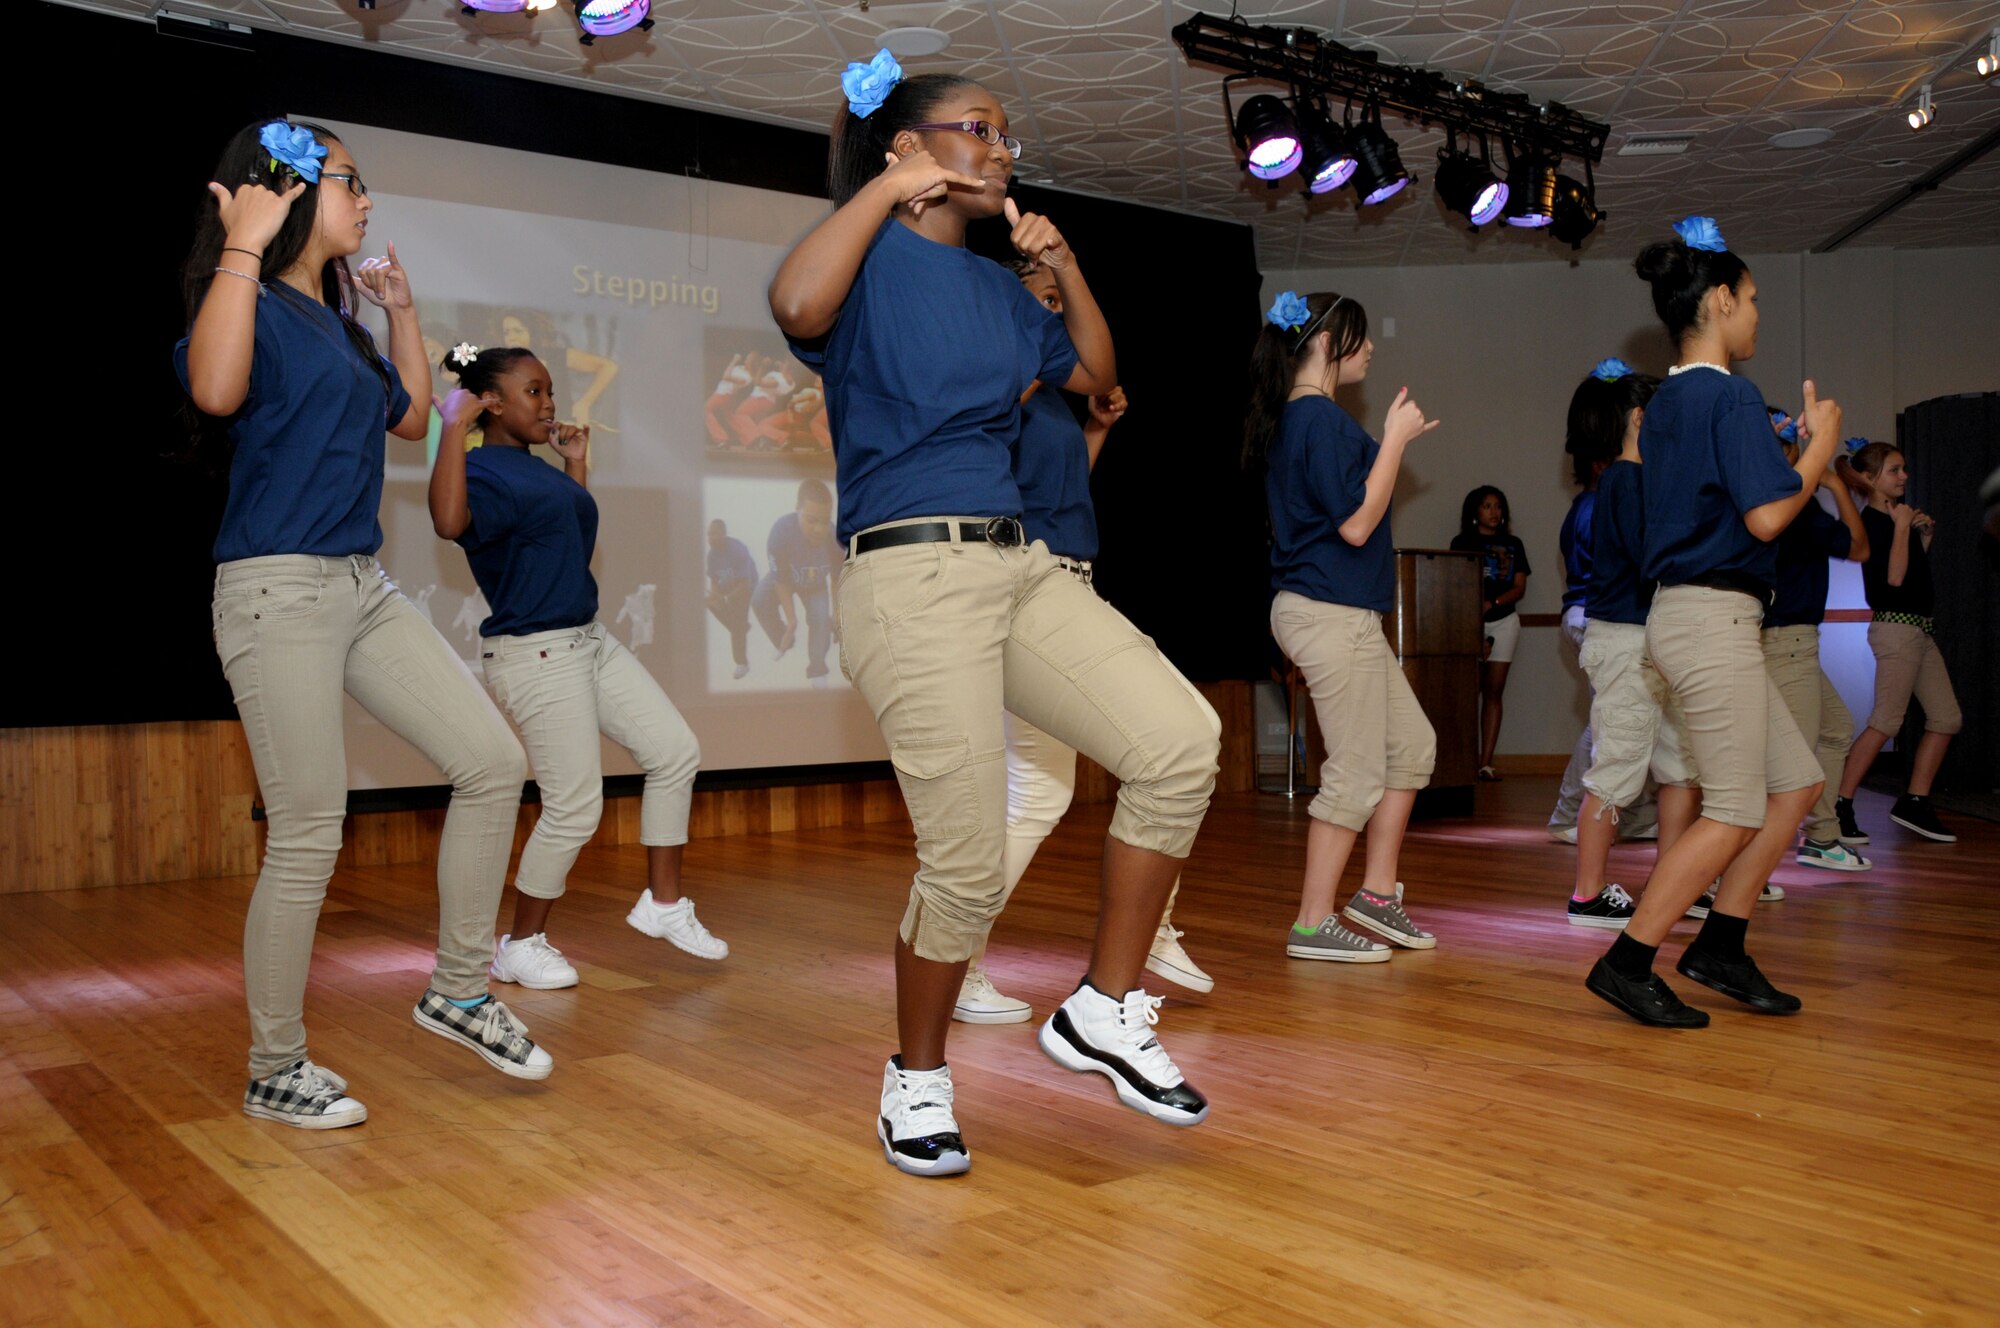 The Andersen Middle School’s step team performs during the Black History Month celebration luncheon sponsored by Andersen’s multicultural committee Feb. 24.  (U.S. Air Force photo/Senior Airman Jeffrey Schultze)  